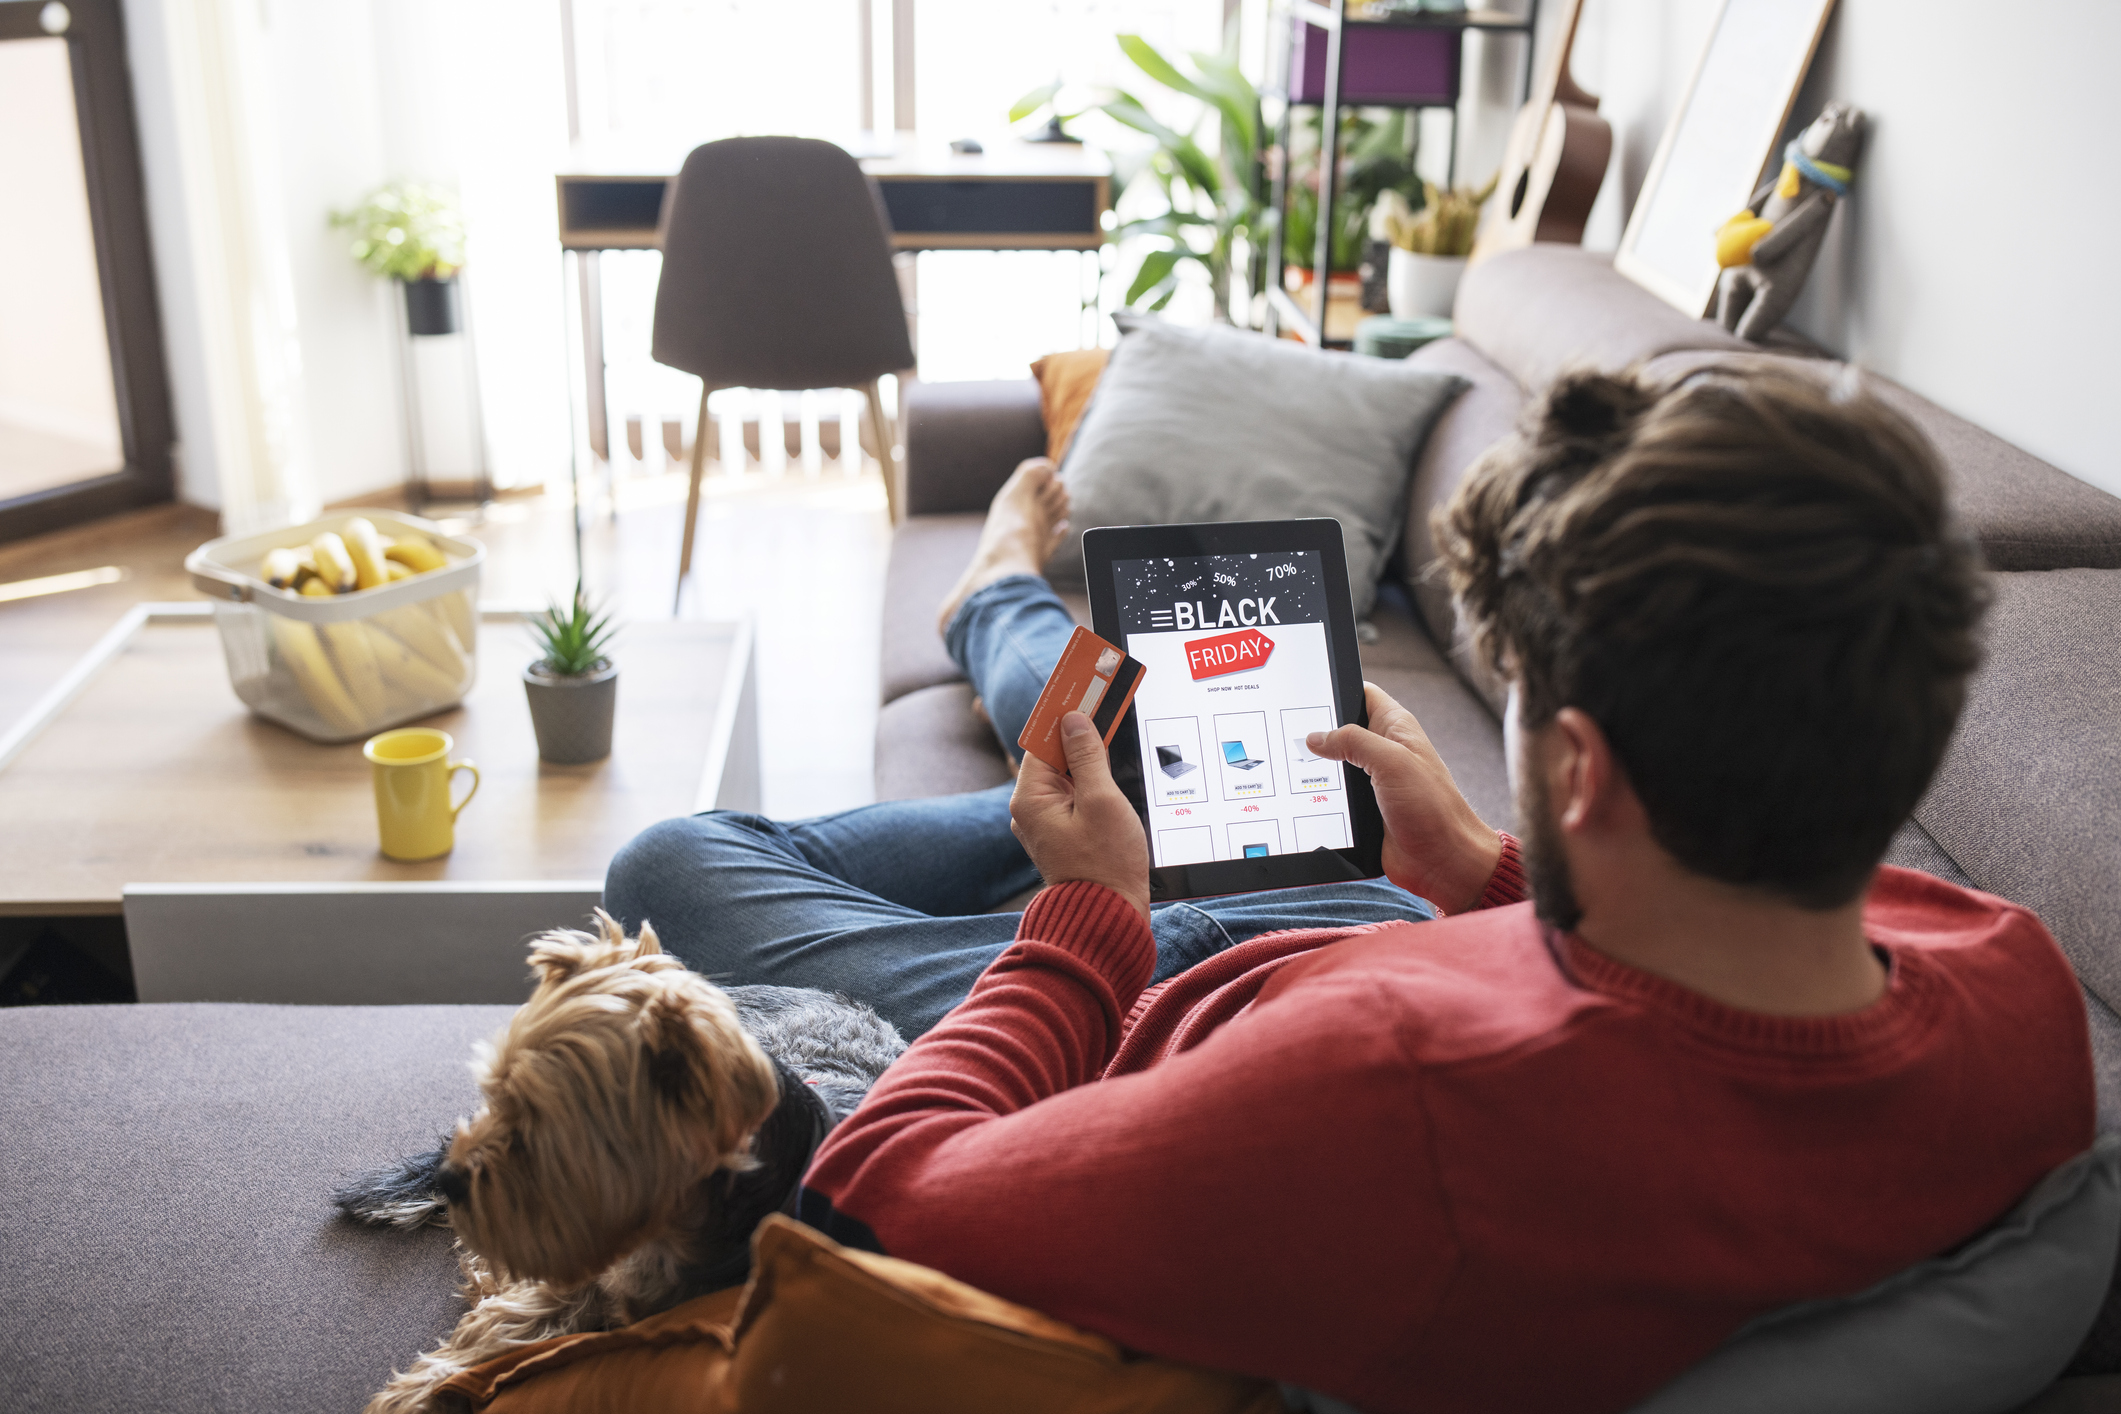 Man and his dog relaxing at home and shopping electronics online during Black Friday sale.